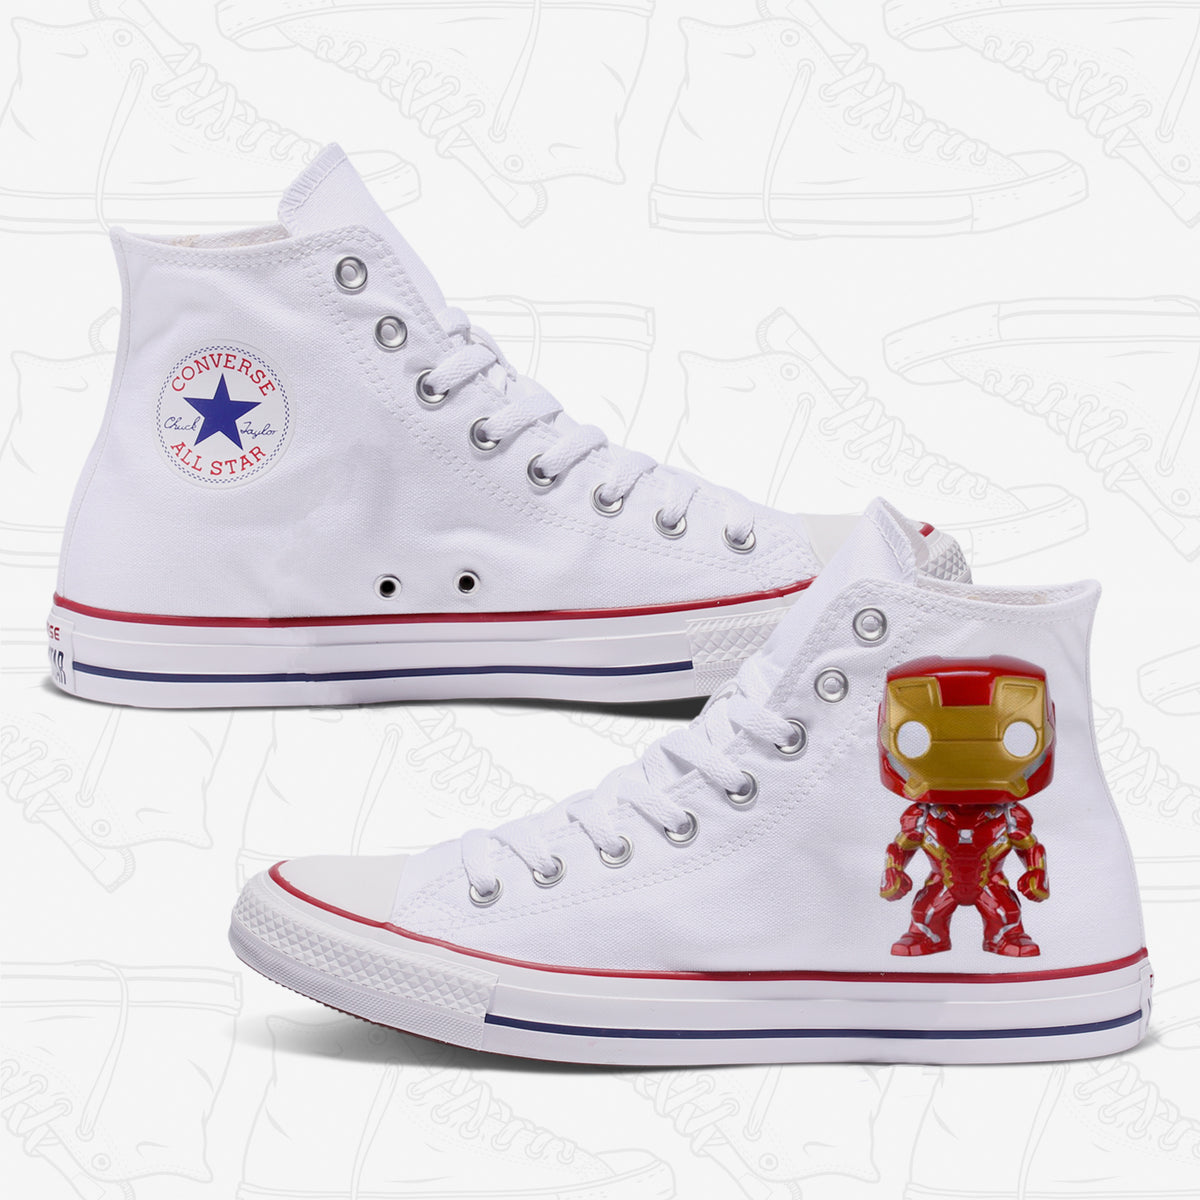 Iron Man Adult Converse Shoes